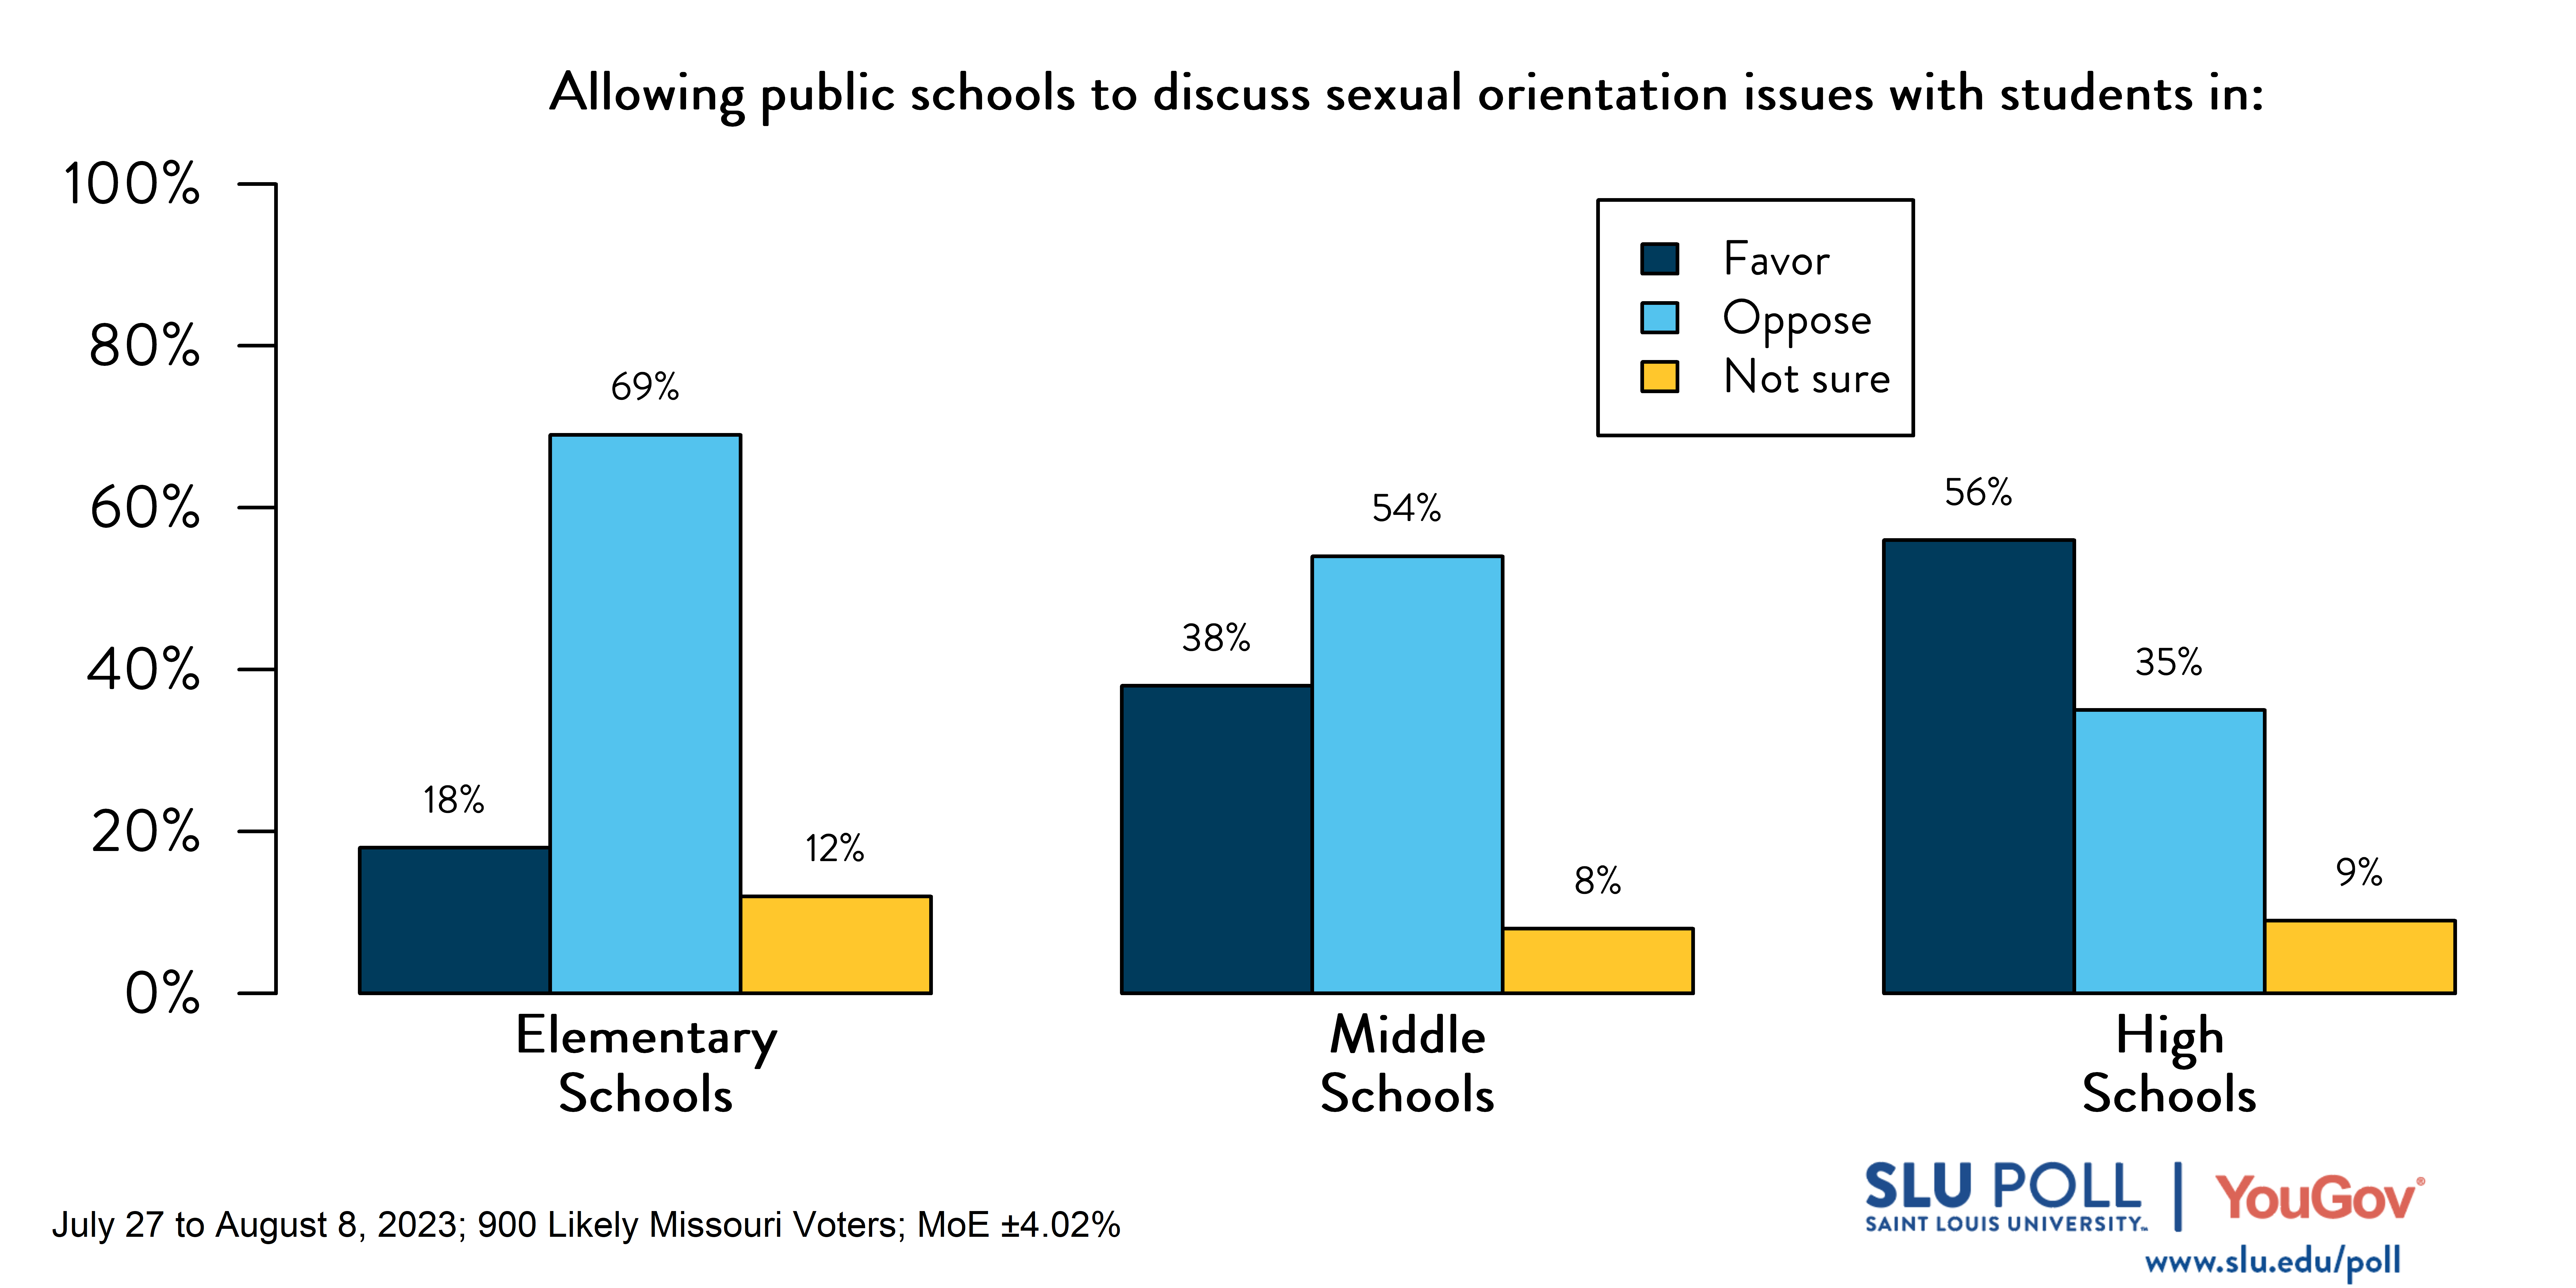 Likely voters' responses to 'Do you favor or oppose public schools being allowed to: discuss sexual orientation issues with students in elementary schools?': 18% Favor, 69% Oppose, and 12% Not Sure. Likely voters' responses to 'Do you favor or oppose public schools being allowed to: discuss sexual orientation issues with students in middle schools?': 38% Favor, 54% Oppose, and 8% Not Sure. Likely voters' responses to 'Do you favor or oppose public schools being allowed to: discuss sexual orientation issues with students in high schools?': 56% Favor, 35% Oppose, and 9% Not Sure.